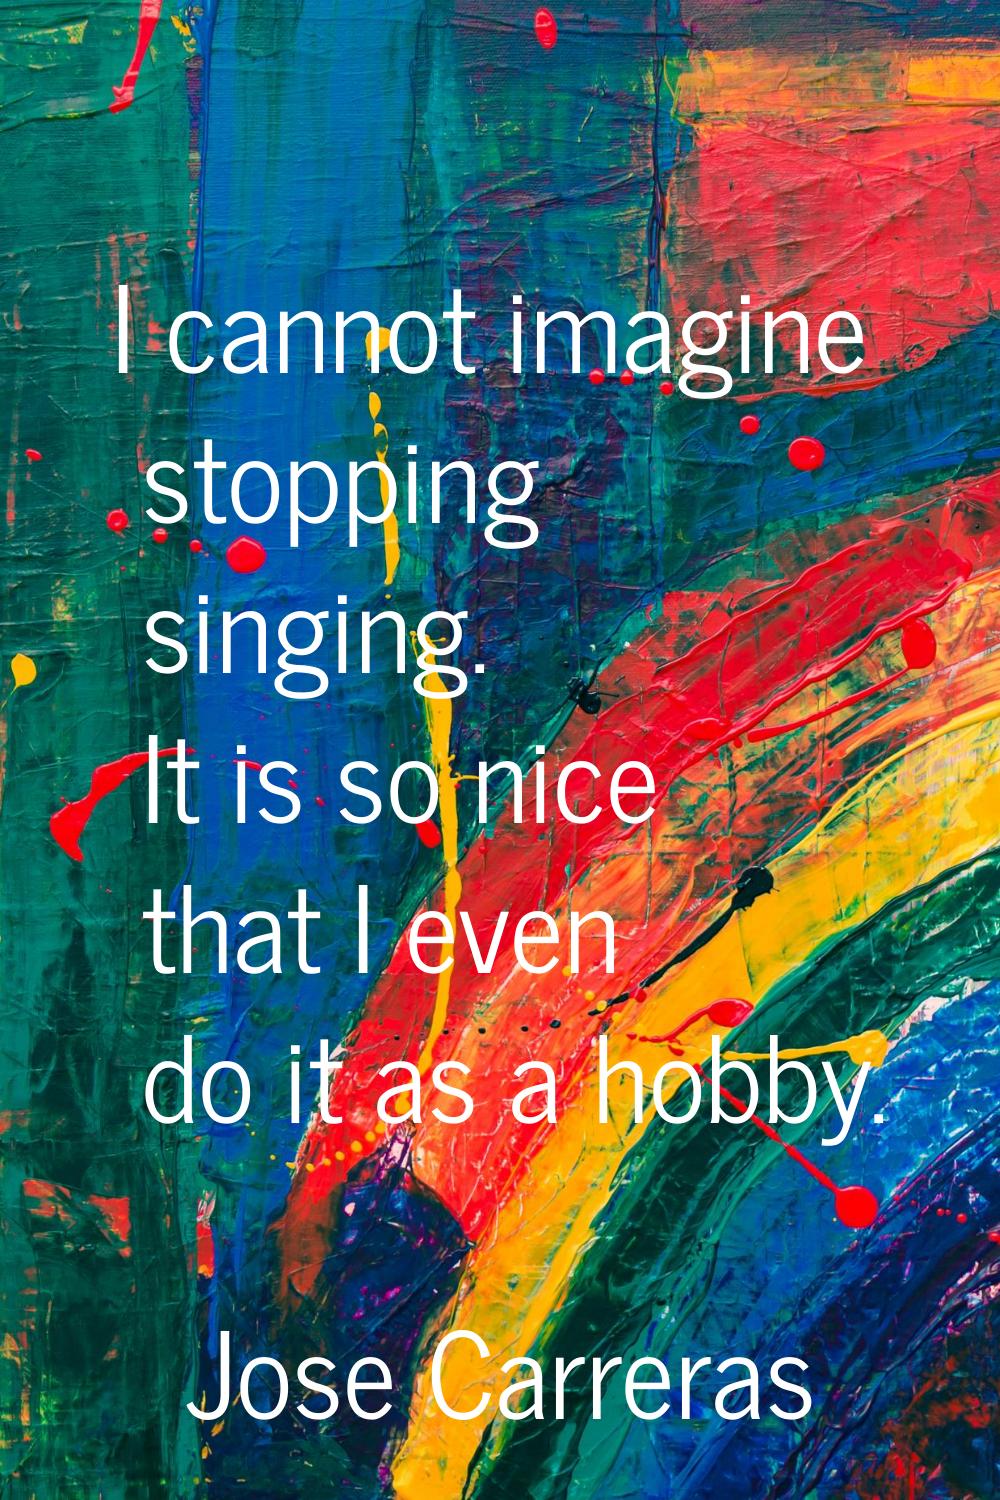 I cannot imagine stopping singing. It is so nice that I even do it as a hobby.